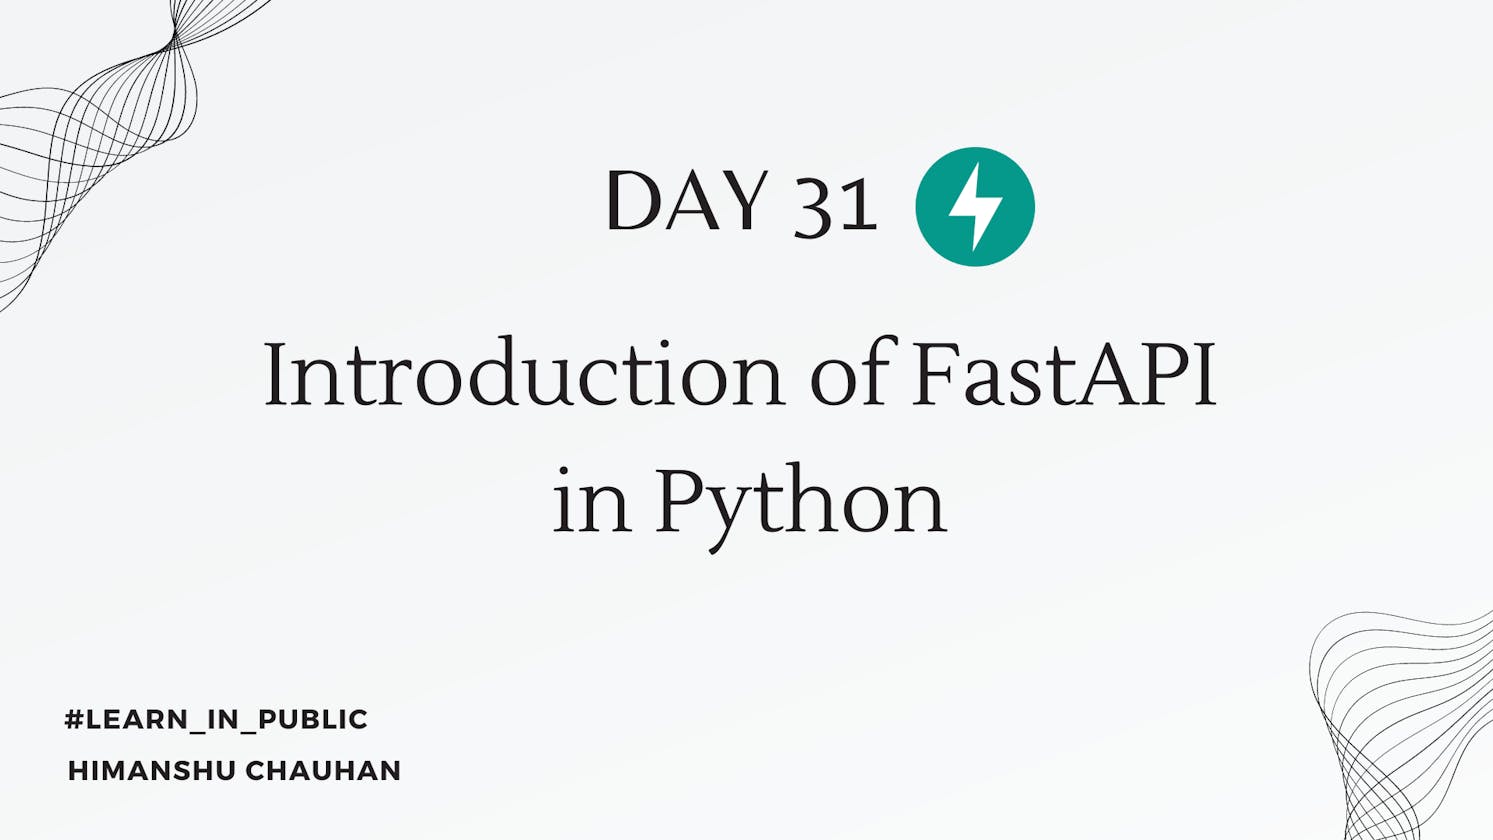 Day 31: Introduction of FastAPI